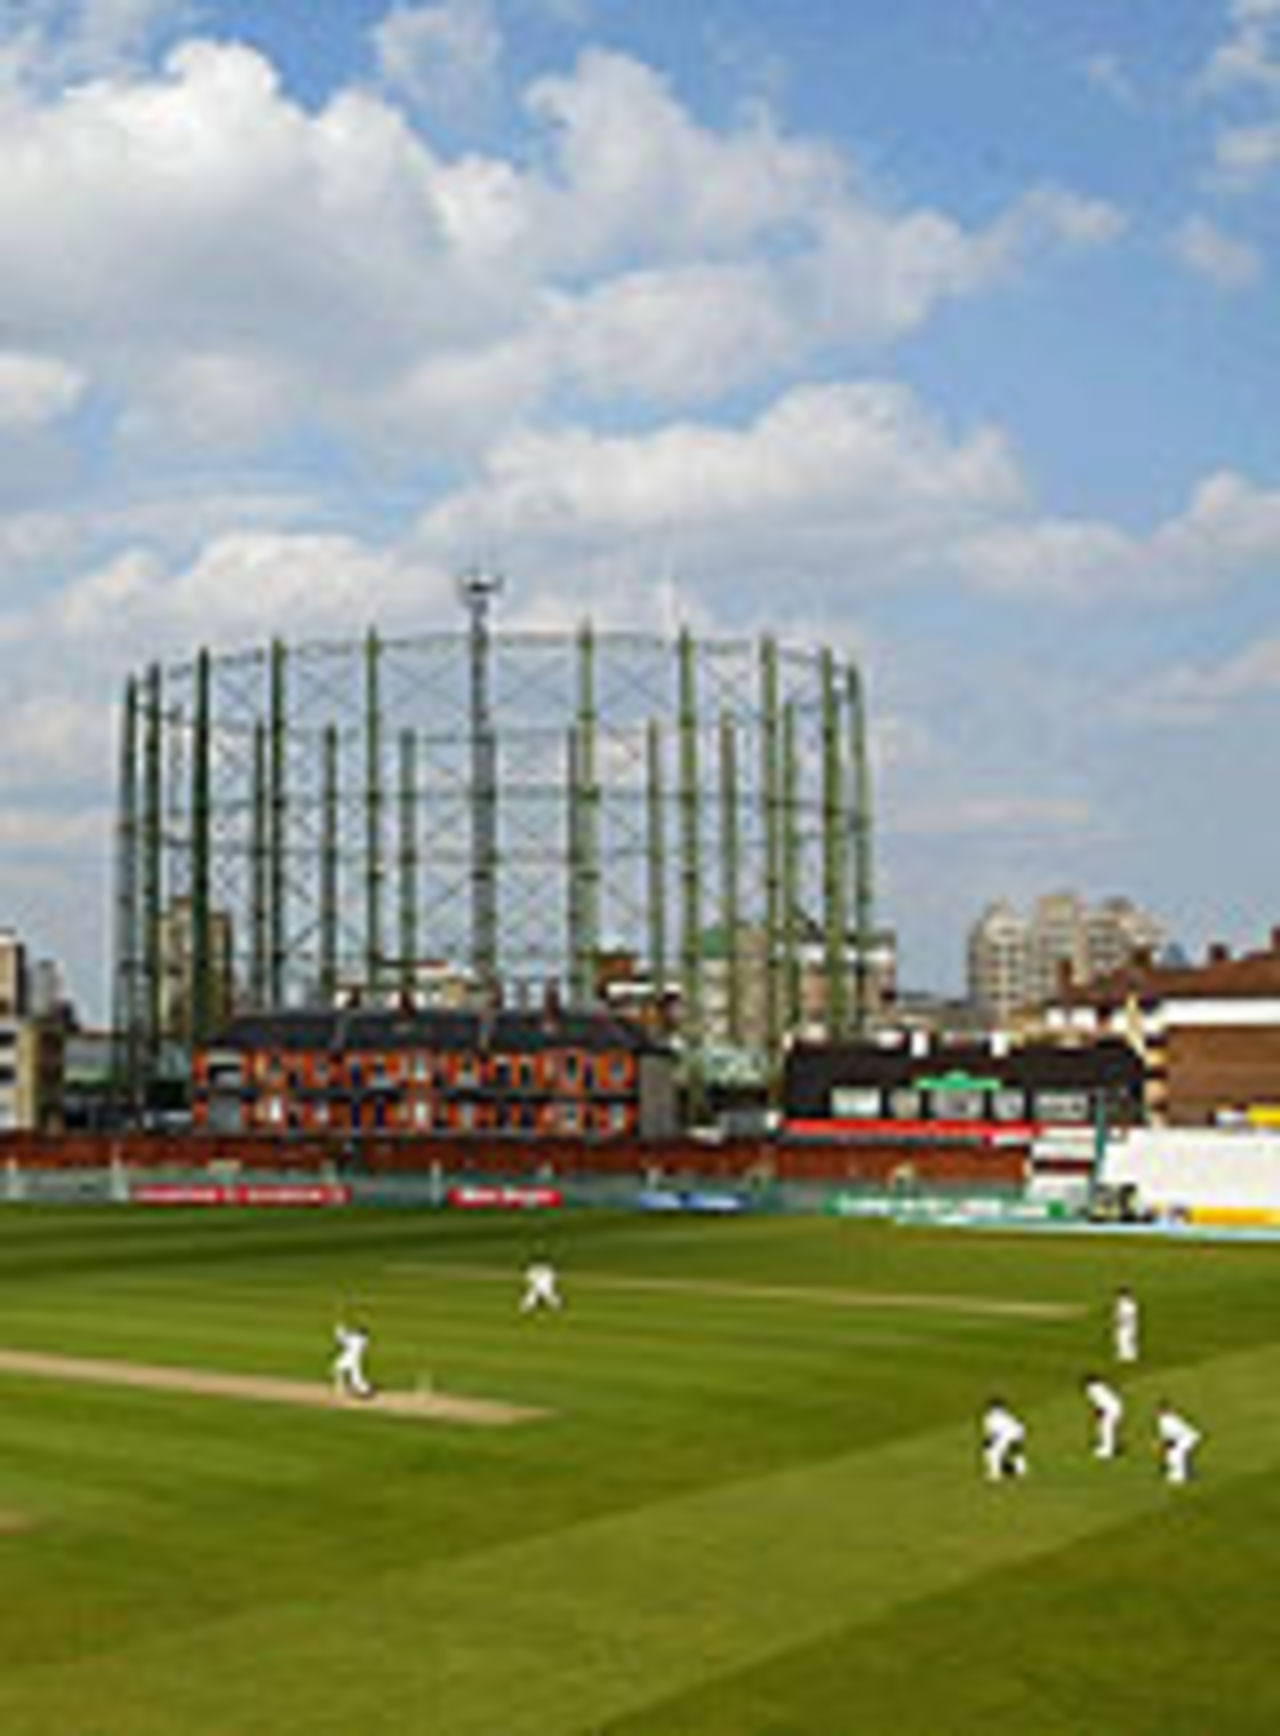 General view of The Oval